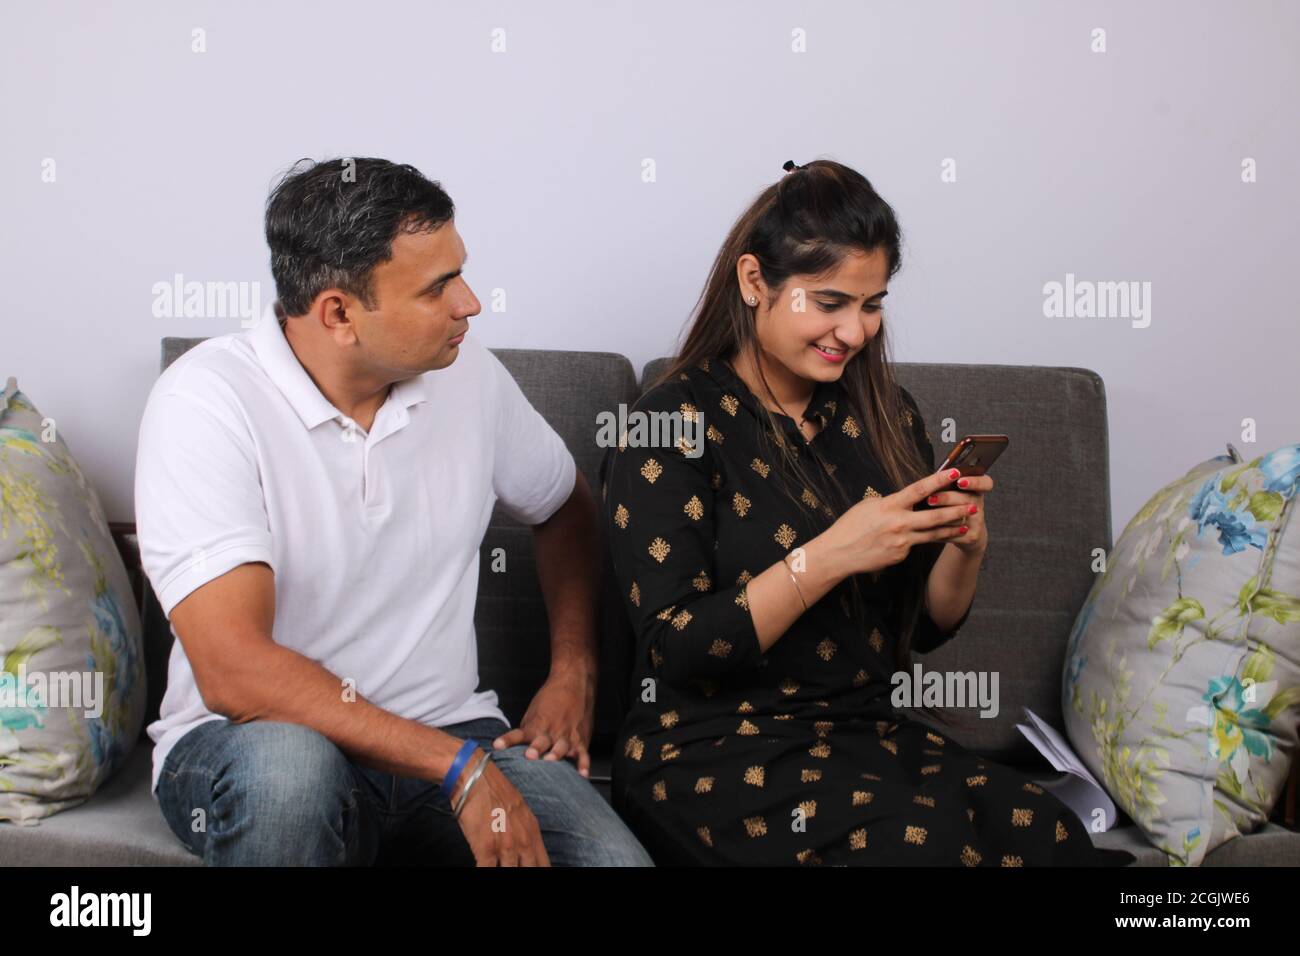 Angry indian husband looking at his wife watching her phone. Stock Photo